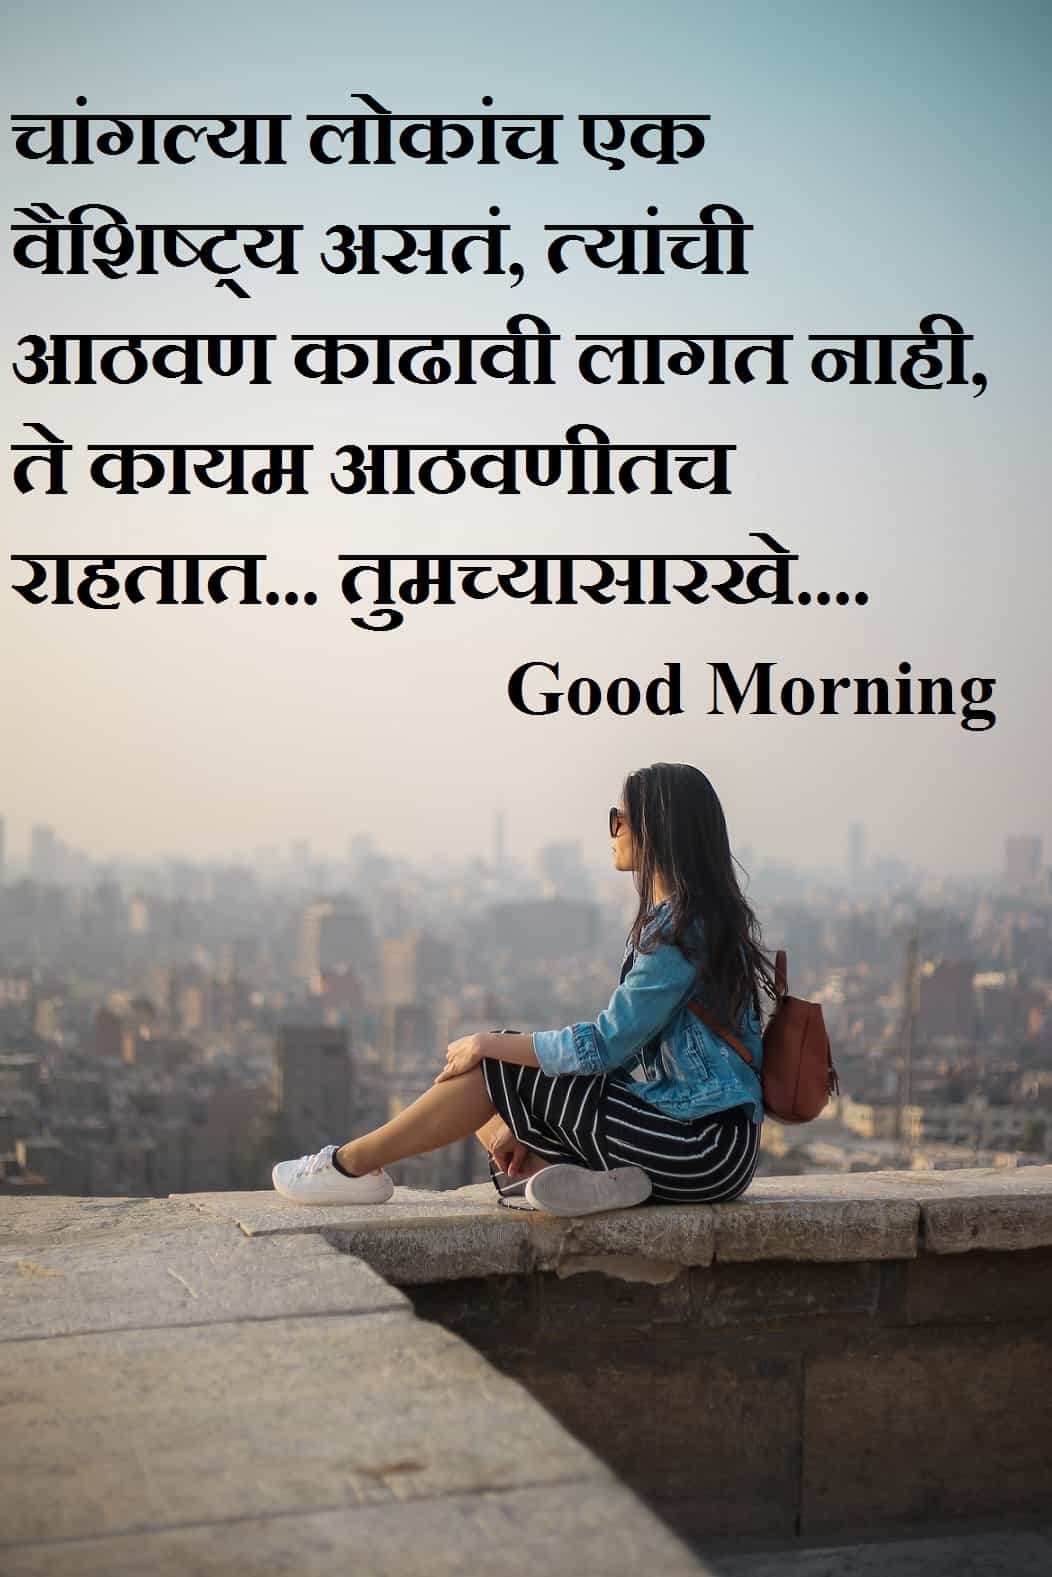 Top 100 Good Morning Message In Marathi Good Morning Messages As we start this day, be thankful for the goodness around you, for the fresh air, but most of all. share thumb